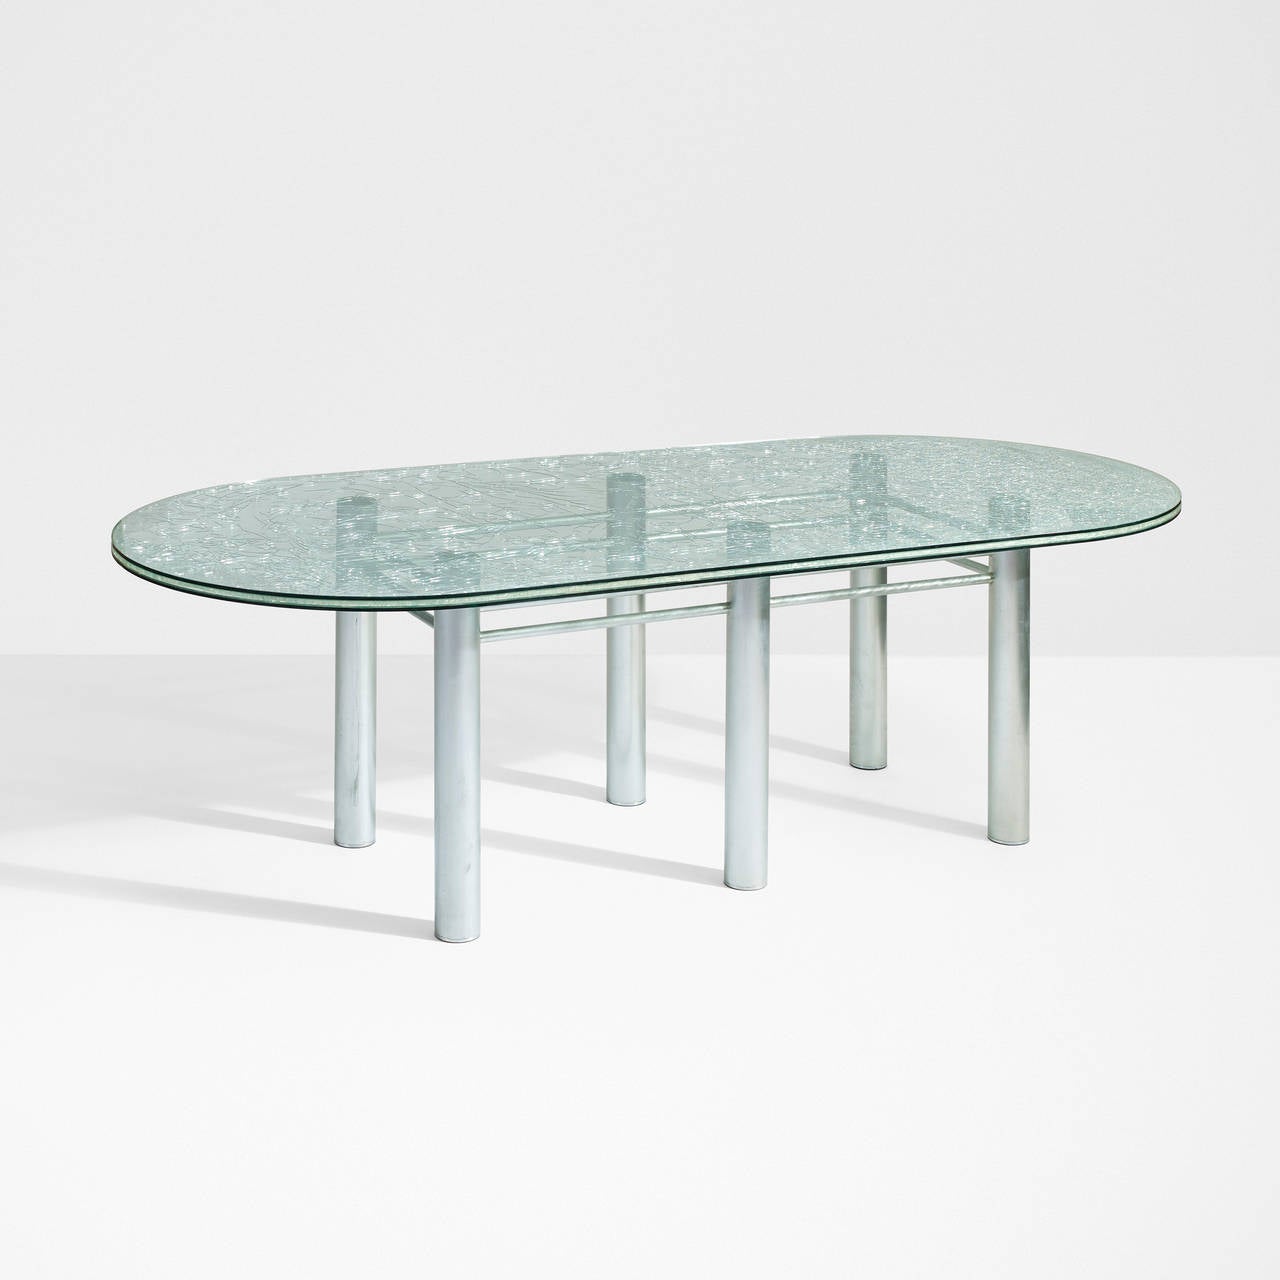 dining table for Tamotsu Yagi by Shiro Kuramata for Ishimaru Co., Ltd and Mihoya Glass

Japan, 1987
laminated whole and broken glass, enameled steel, silicon
93.5 w x 43.25 d x 29 h inches

This work is unique.

provenance: Tamotsu Yagi, San